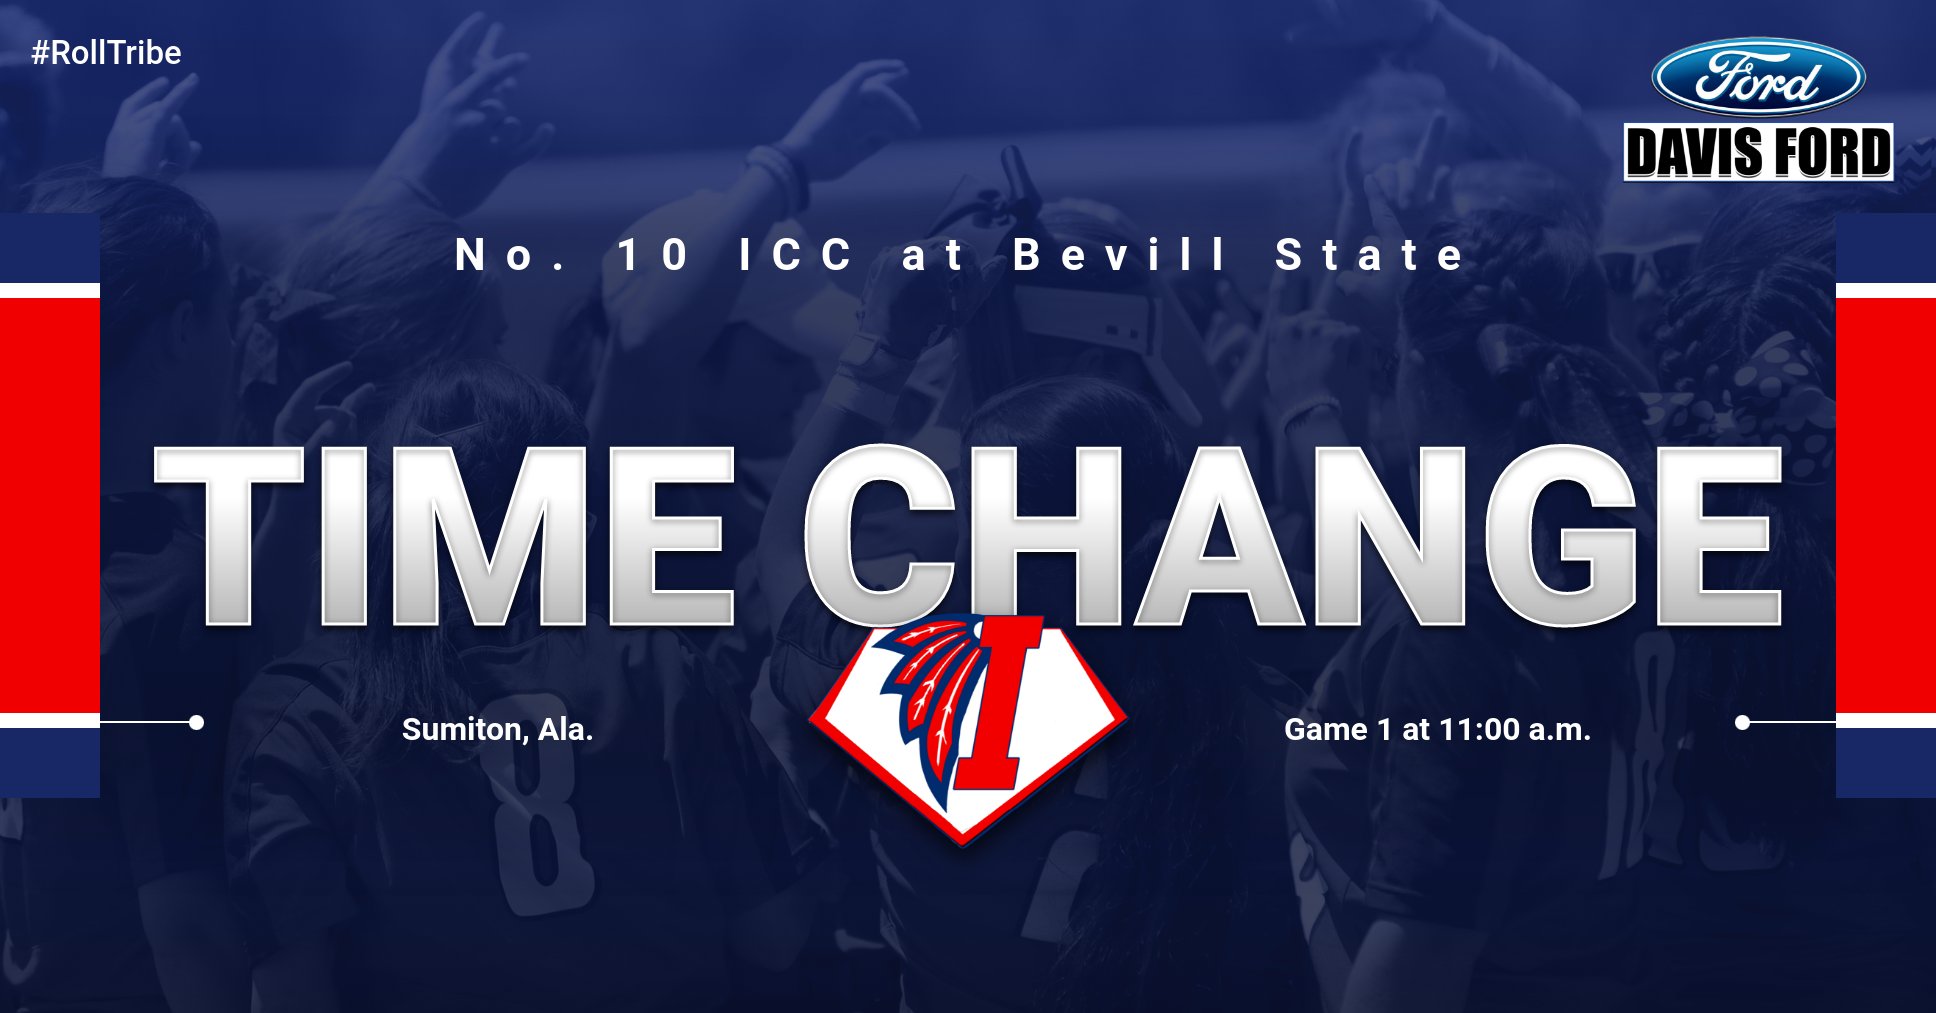 Time change for softball games at Bevill State